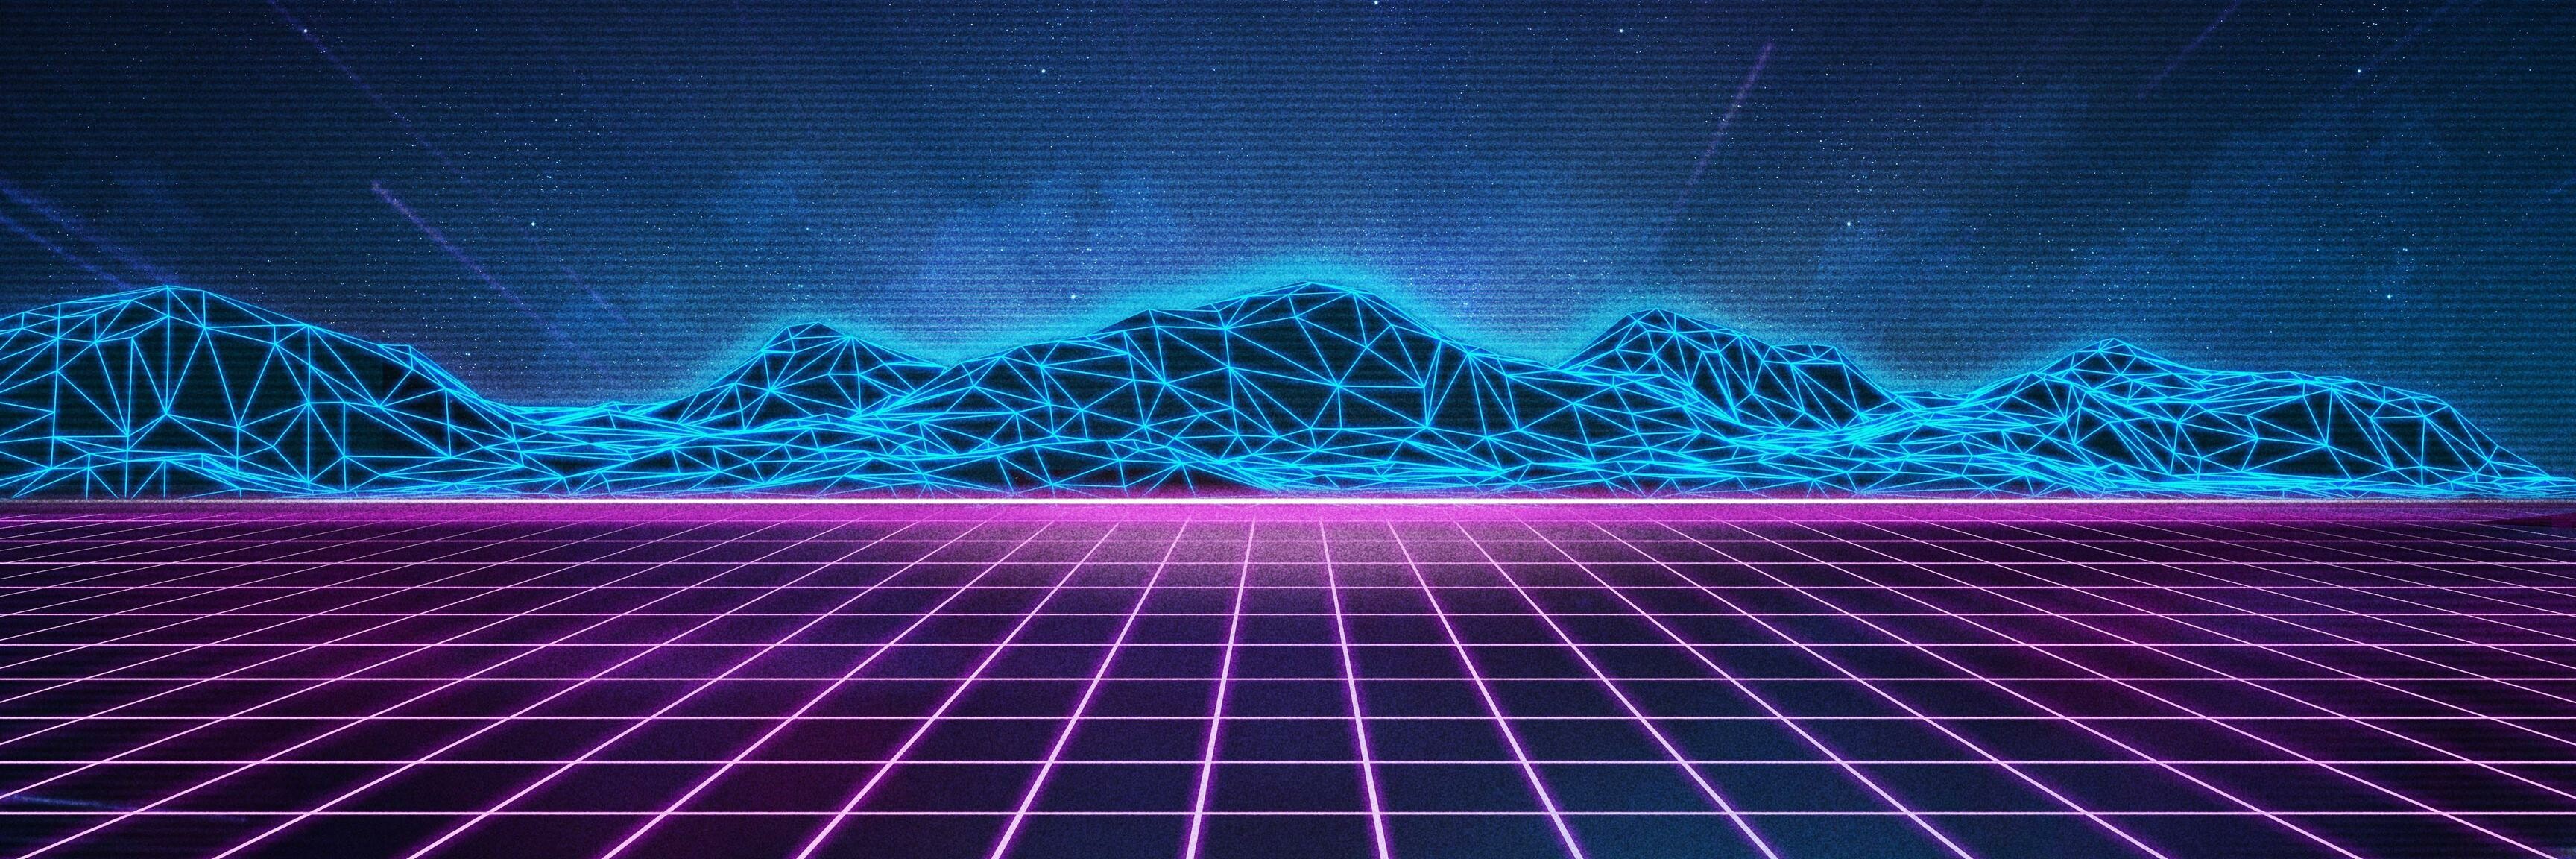 66+ 80's Wallpapers: HD, 4K, 5K for PC and Mobile | Download free images  for iPhone, Android